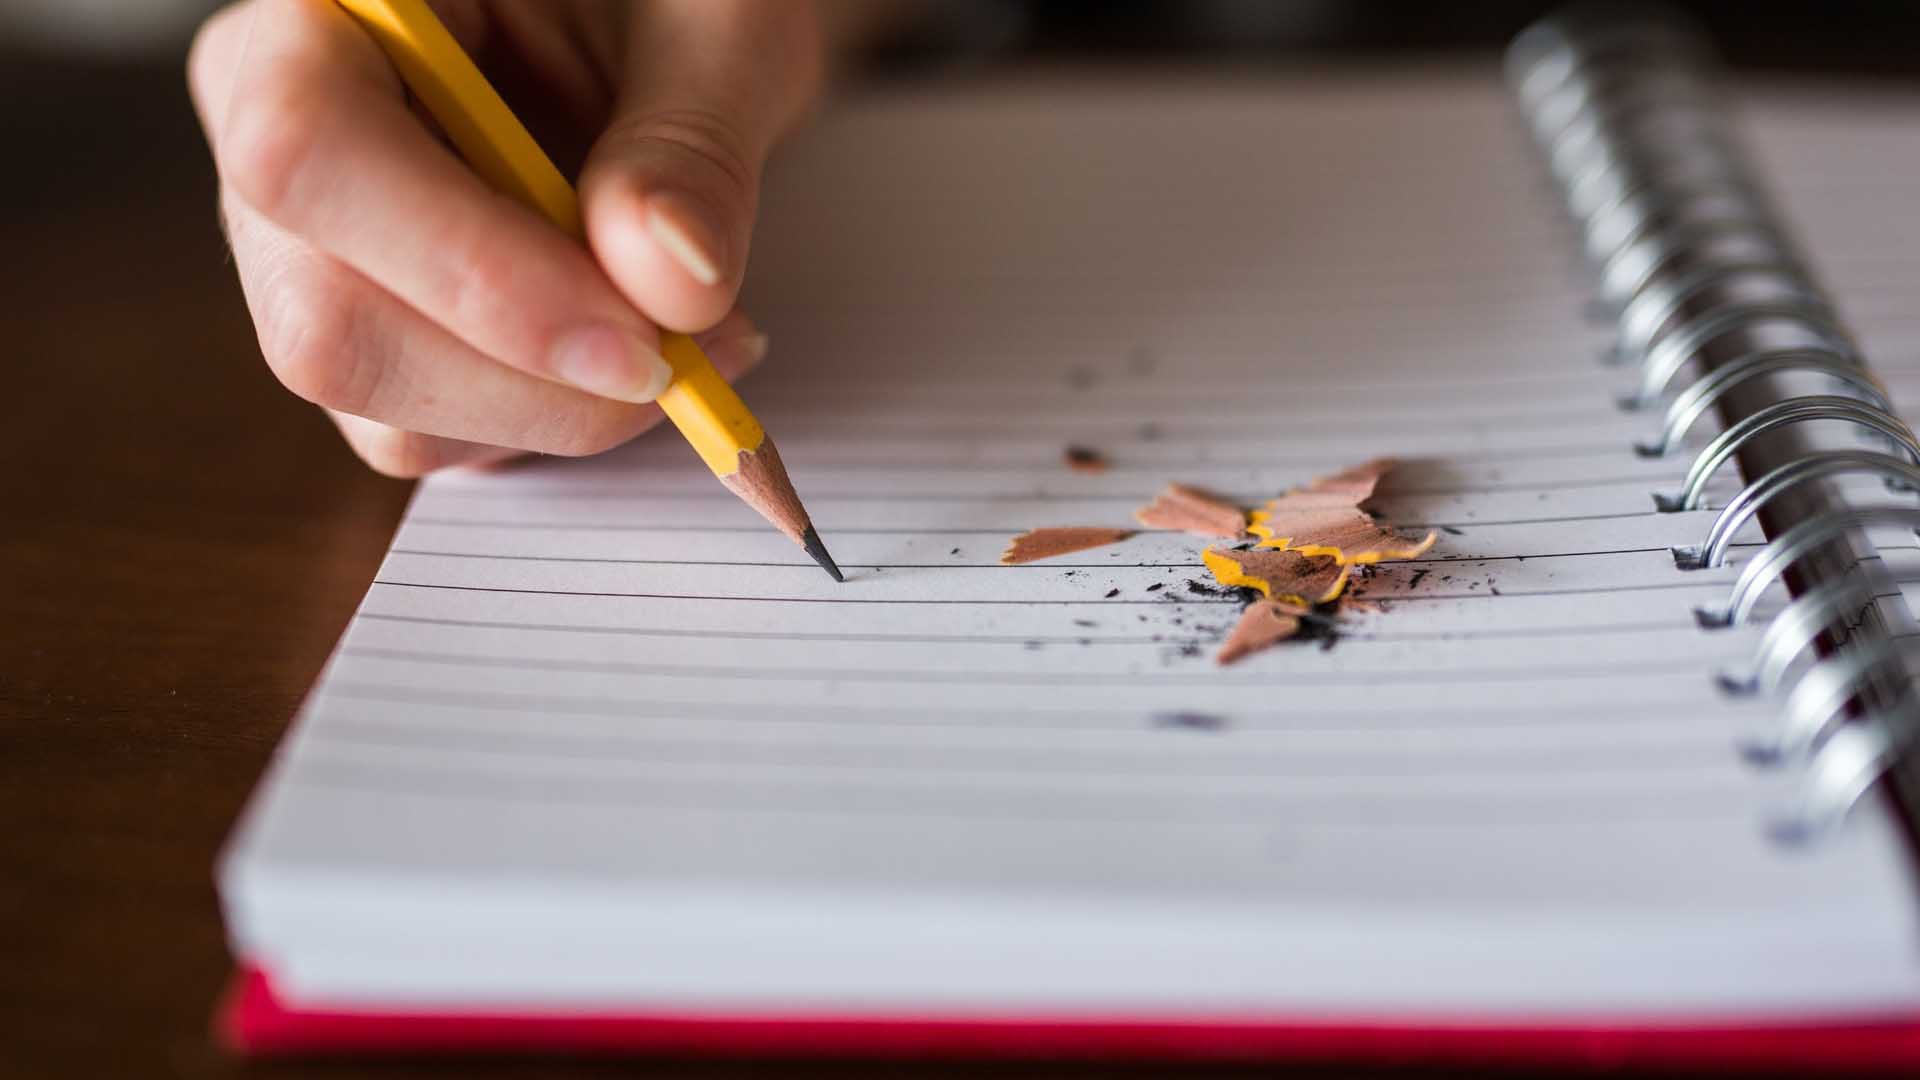 Scriptwriting/screenwriting - notebook with pencil and pencil shavings